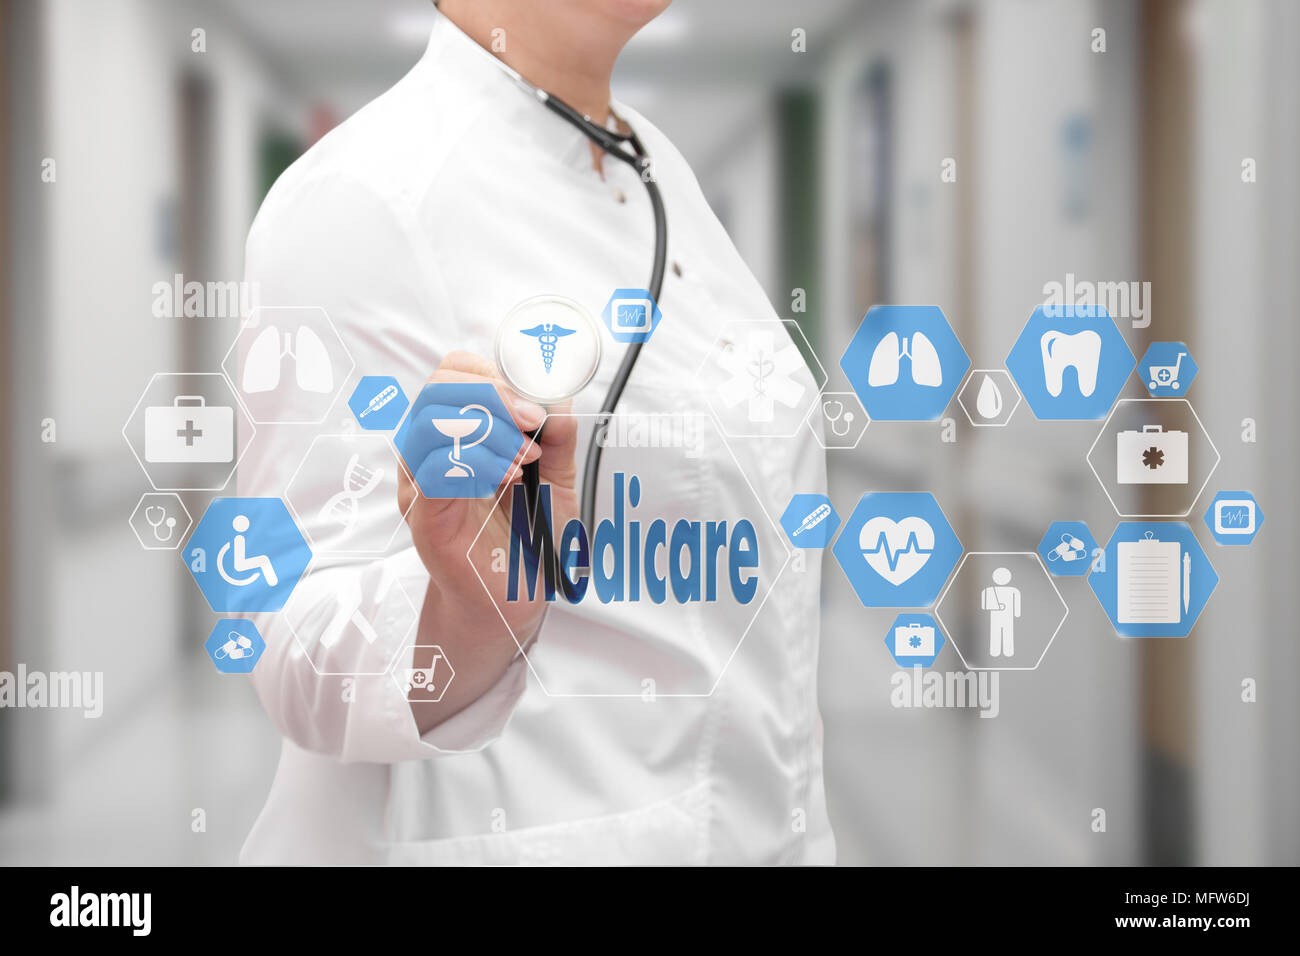 Medical Doctor with stethoscope and Medicare icon in Medical network connection on the virtual screen on hospital background.Technology and medicine c Stock Photo